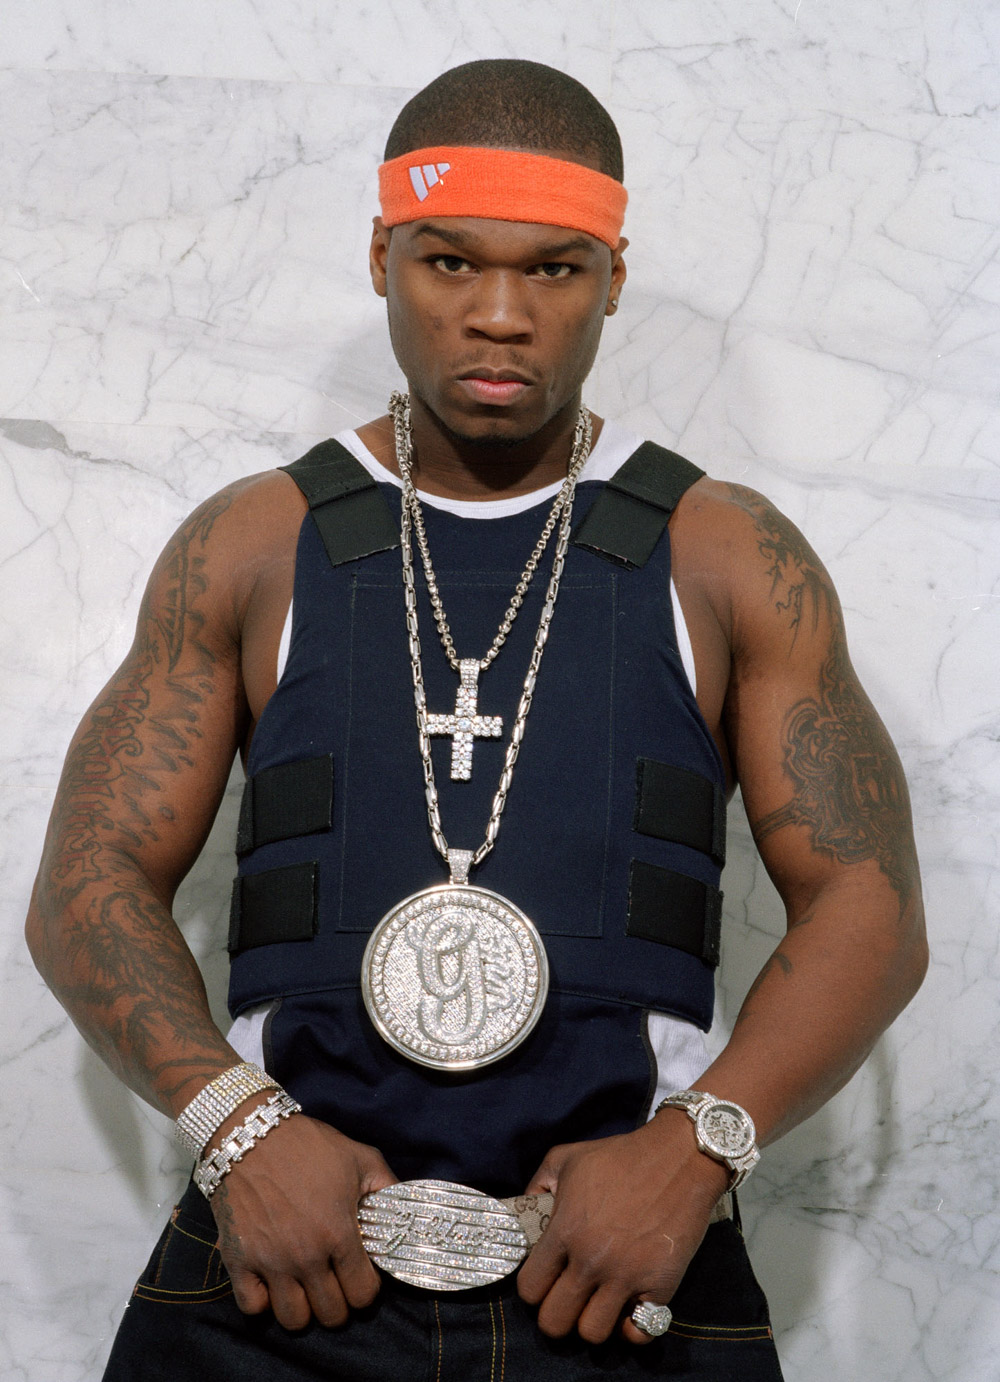 Cool HipHop Gold 50 Cent Round| Alibaba.com